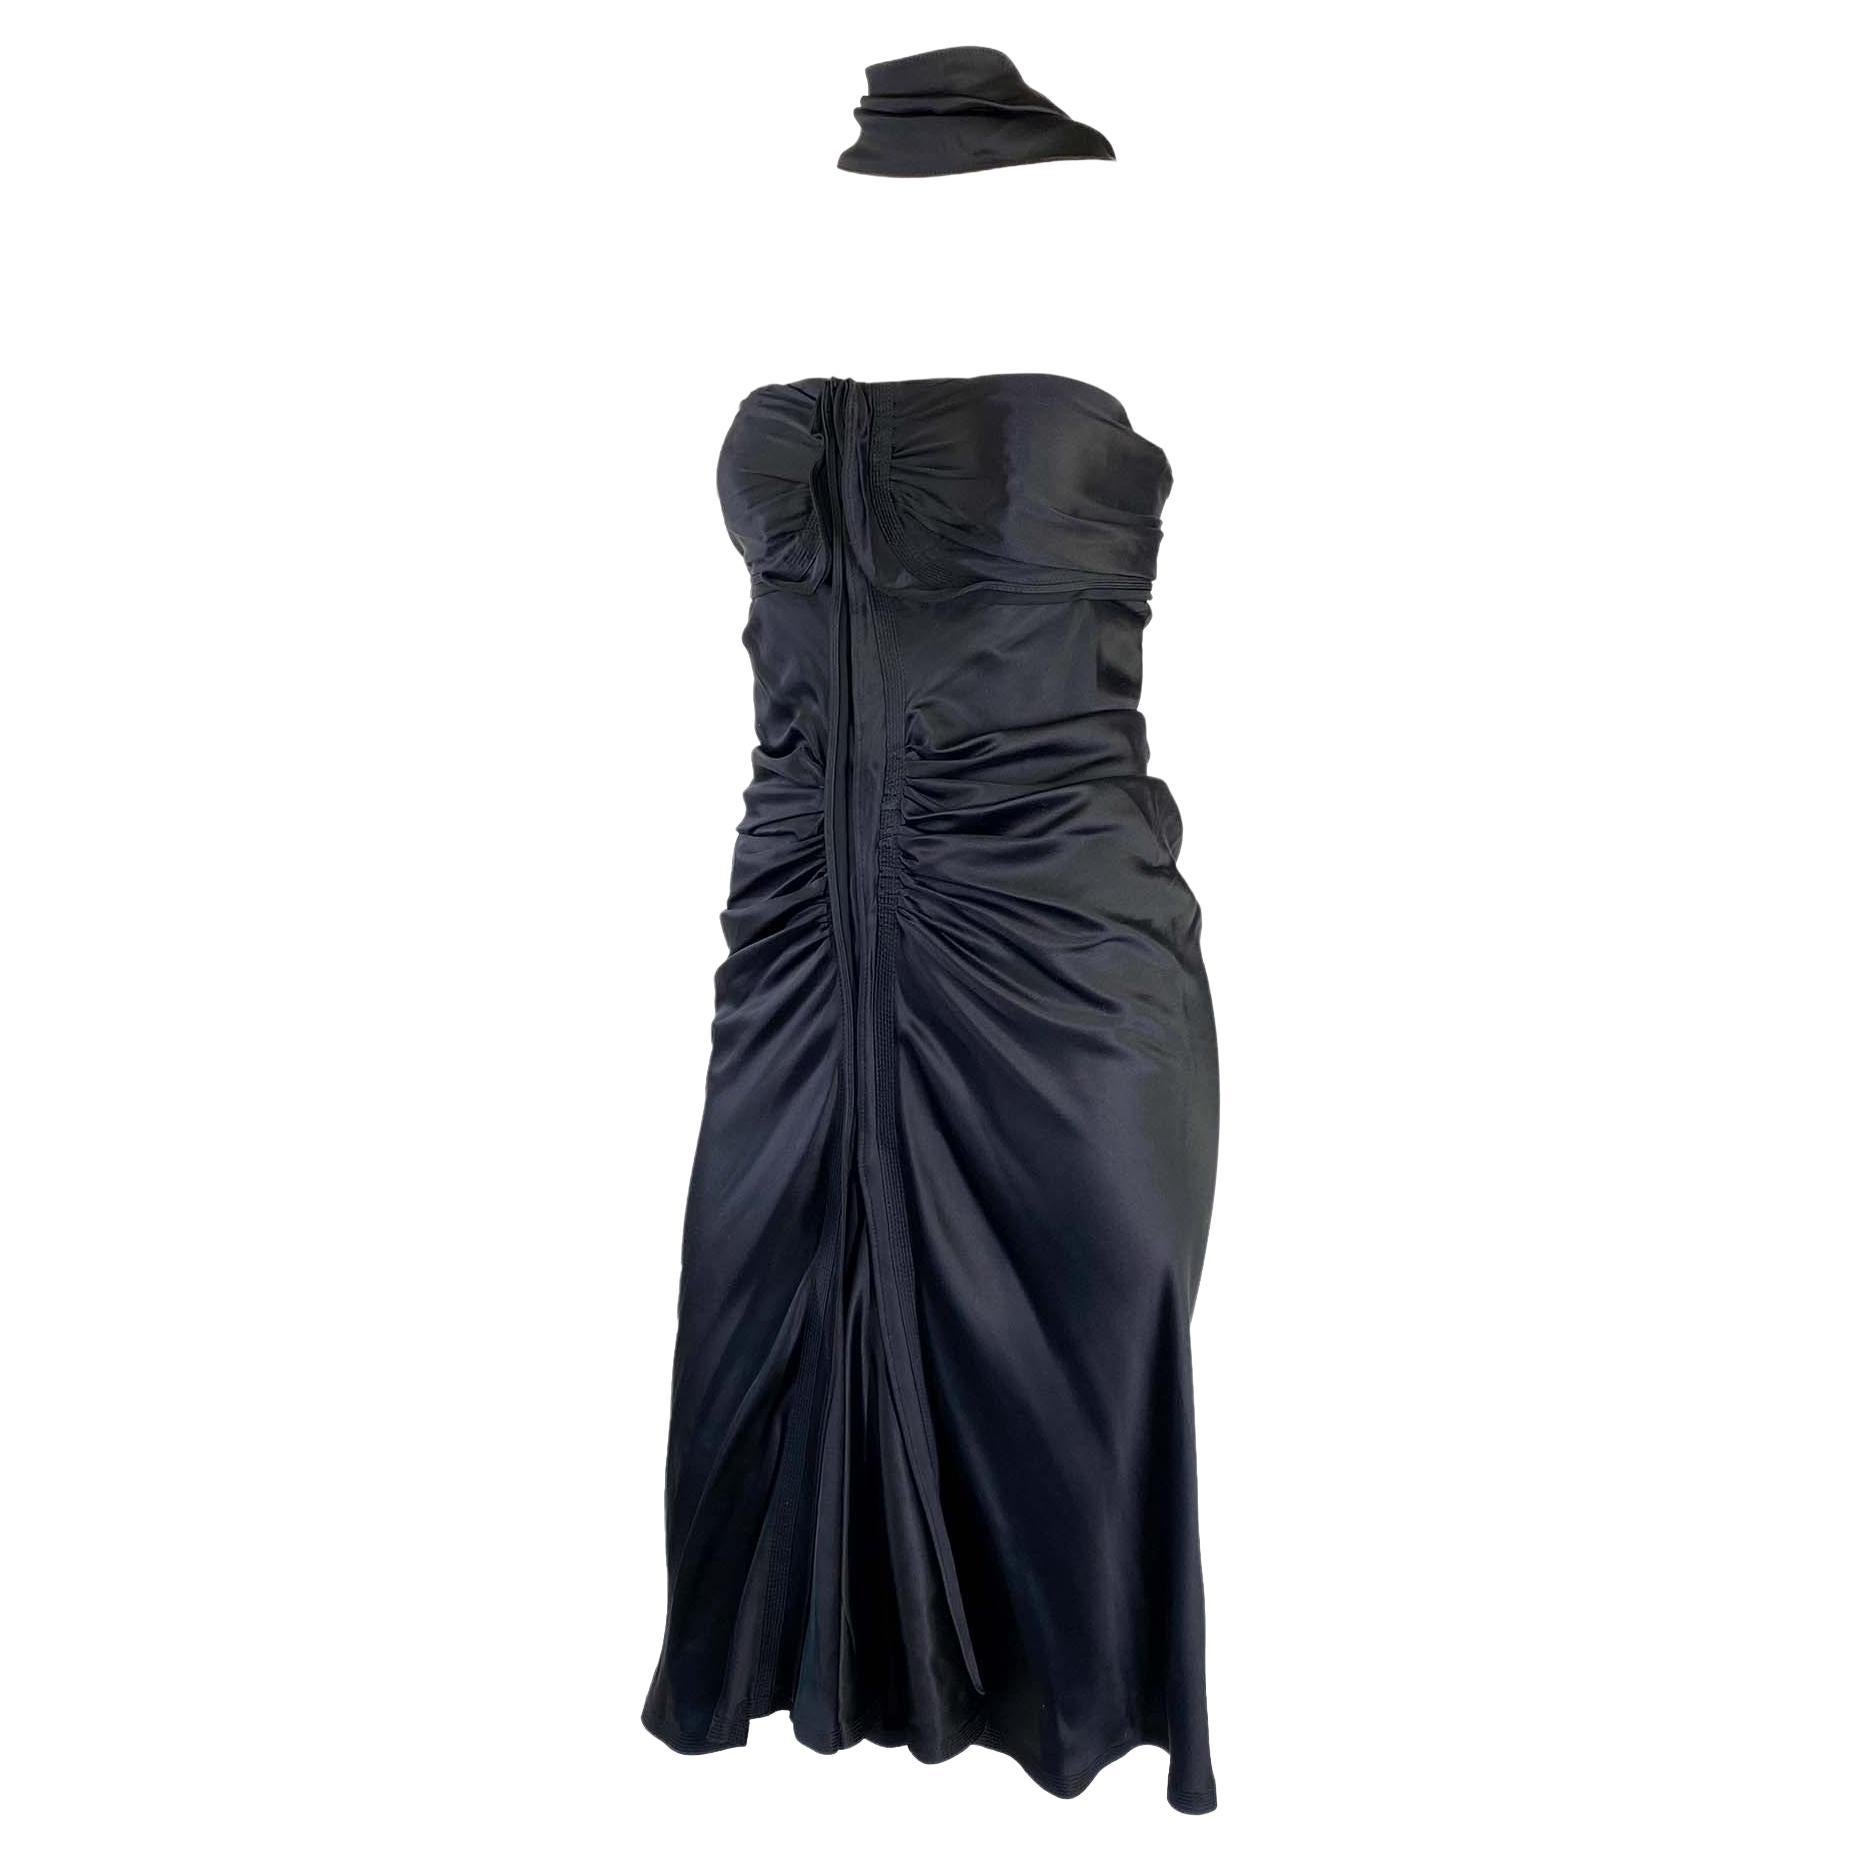 F/W 2003 Yves Saint Laurent by Tom Ford Black Silk Ruched Ruffle Cocktail Dress For Sale